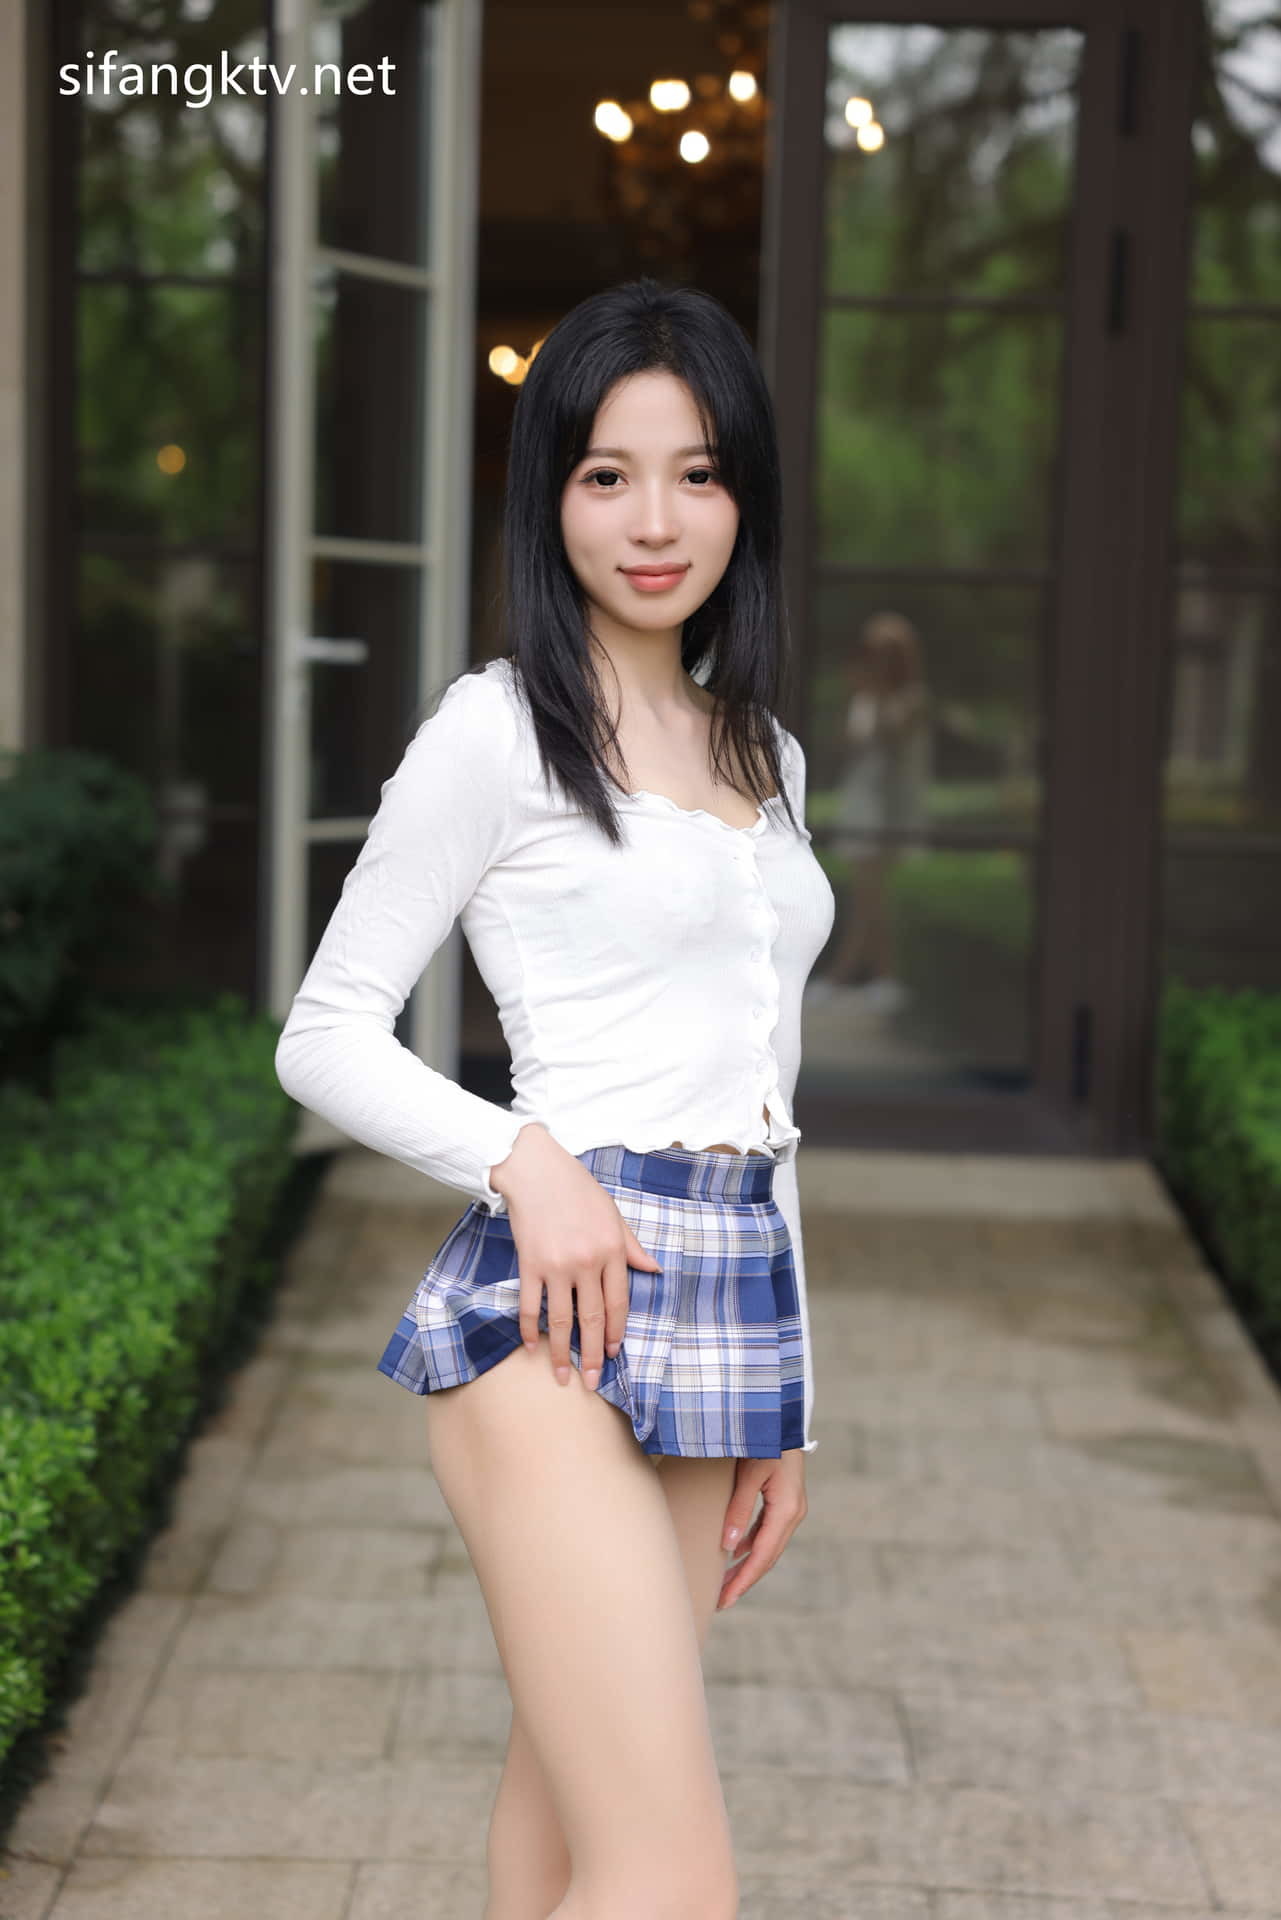 Xiuren.com model is the ultimate pure goddess [Jelly Bean] seductive private shot~ three points of dew + student uniform